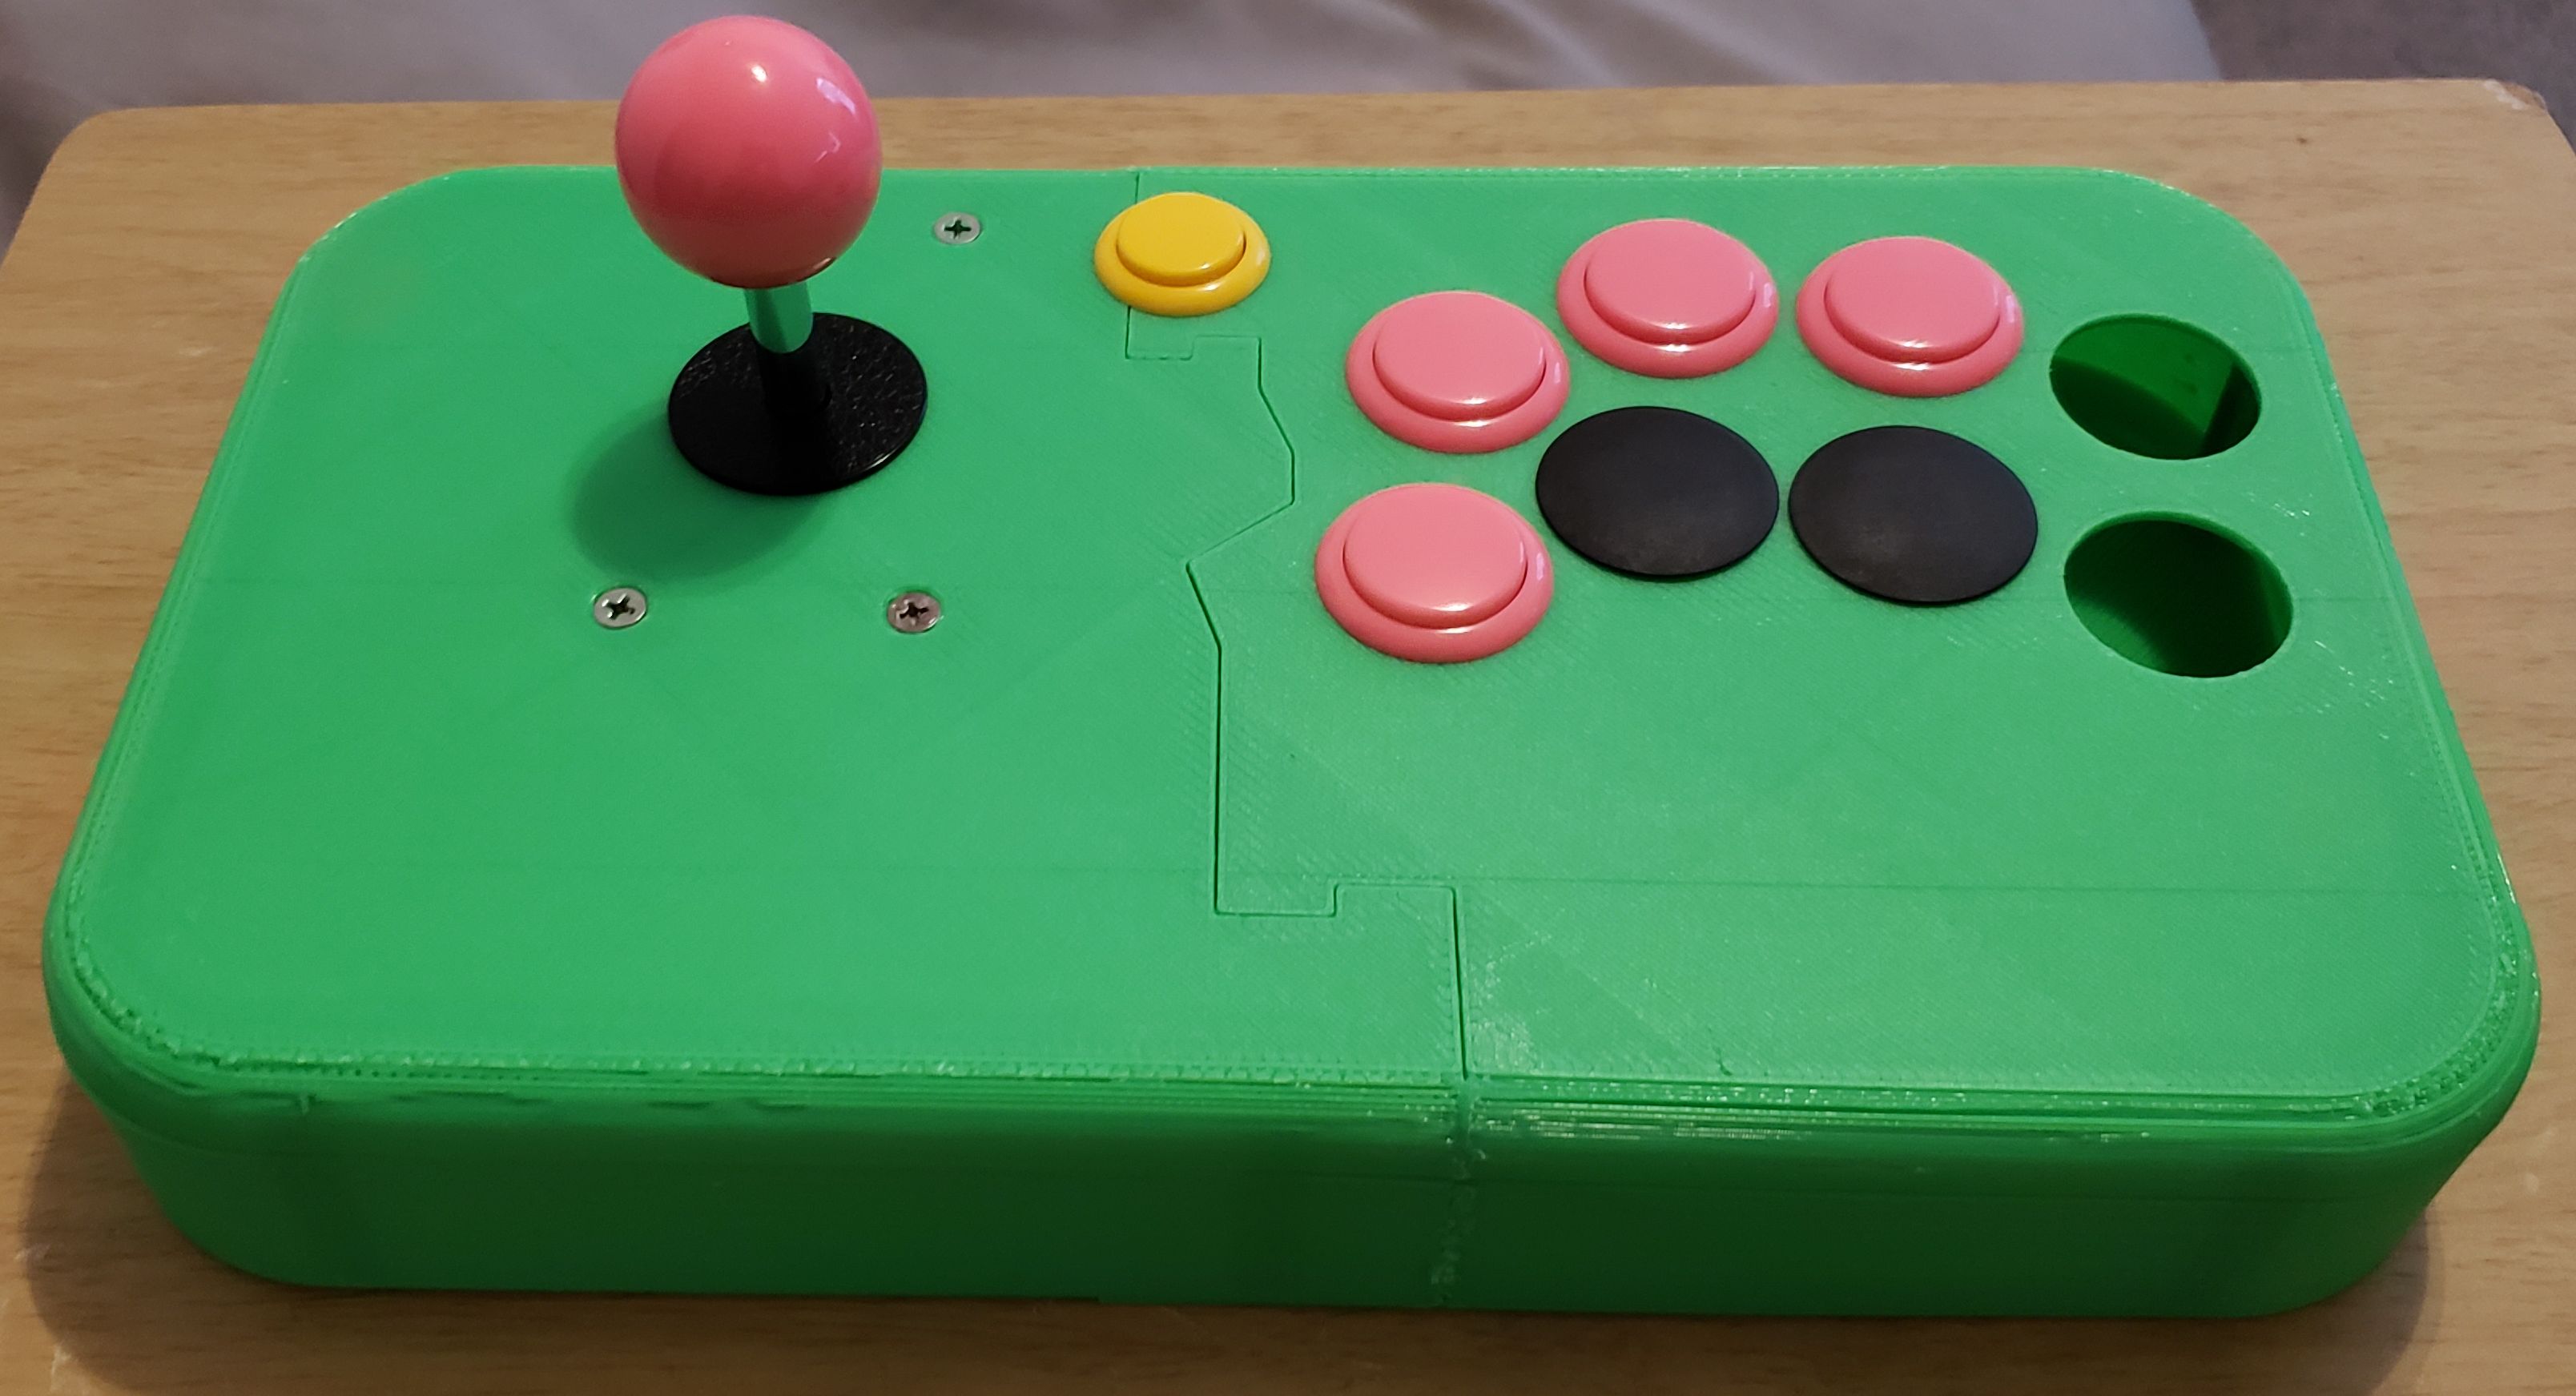 Arcade Stick with Swappable Top